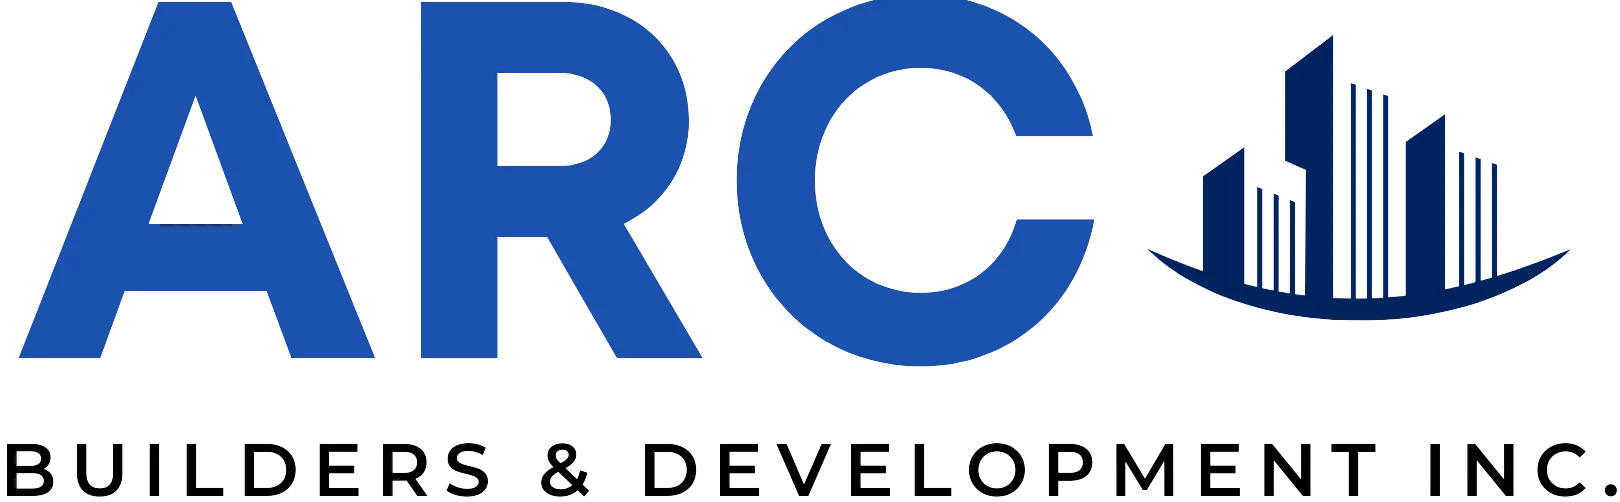 Logo of Arc Builders & Development Inc. featuring stylized buildings and remodeling text in a construction theme, set against a San Francisco backdrop.